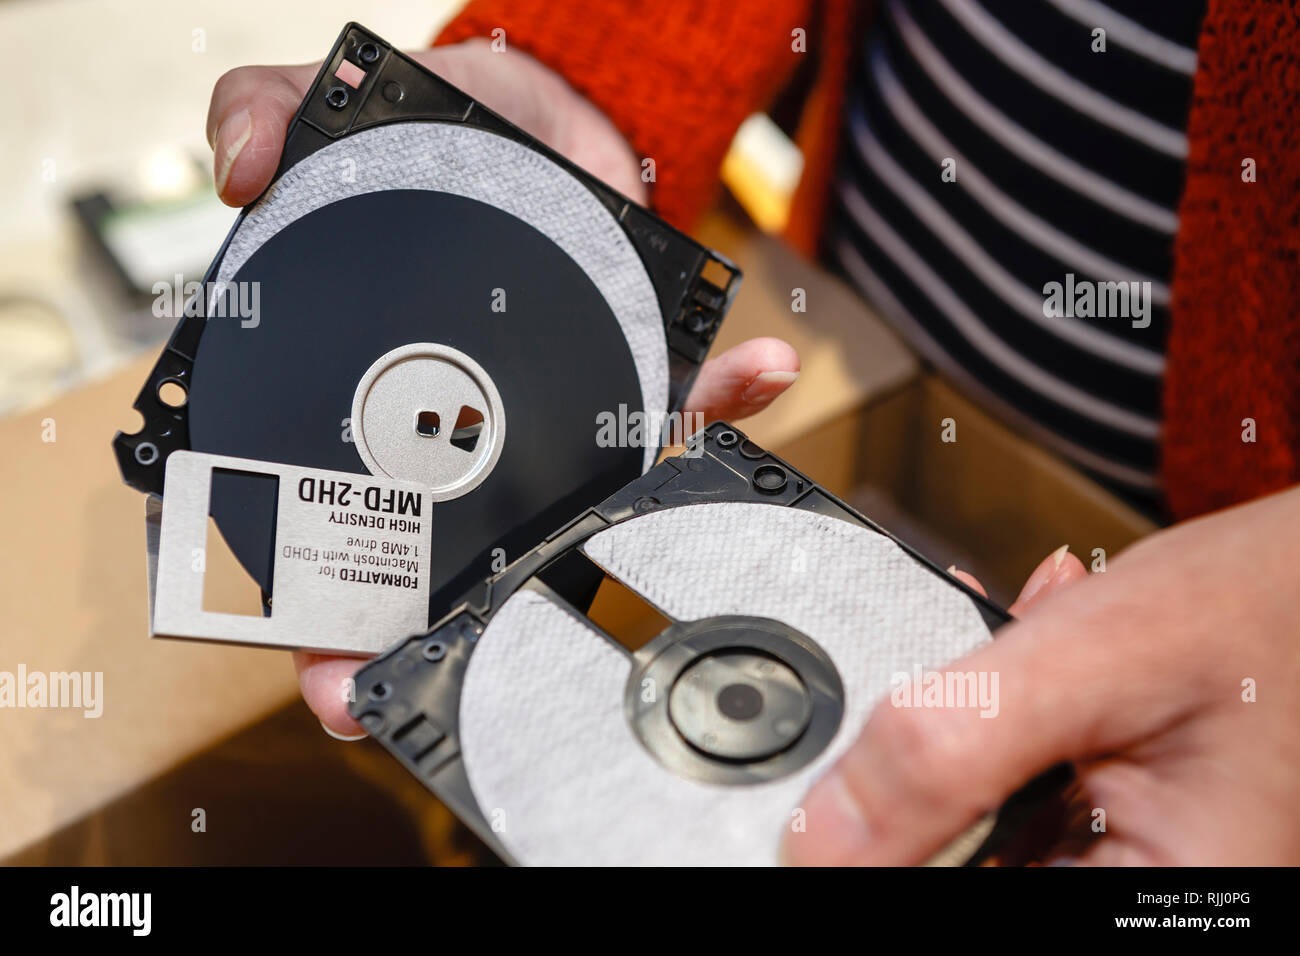 Cutting up old floppy disc with scissors to destroy information Stock Photo